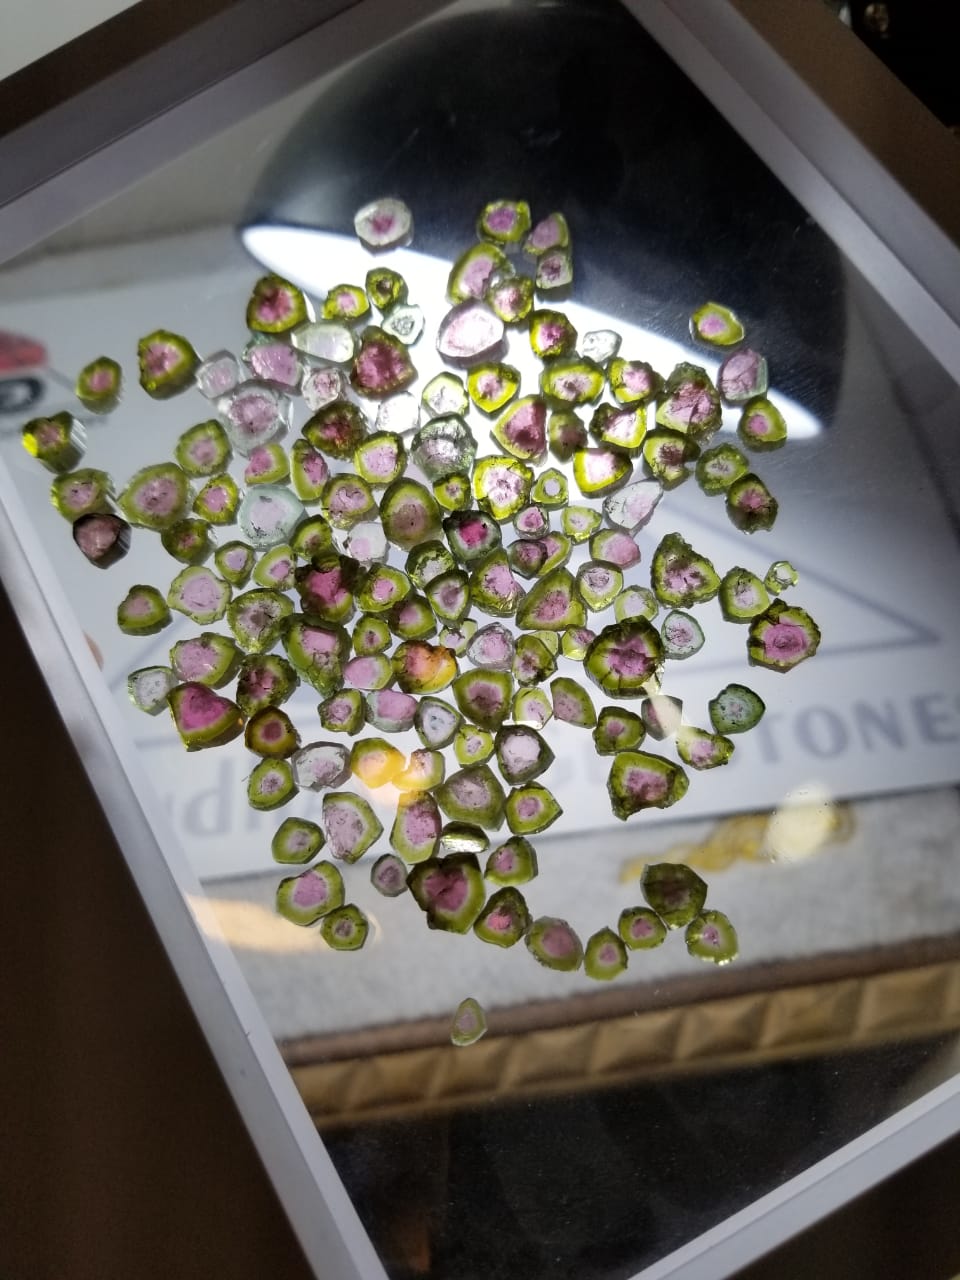 Watermelon tourmaline slices lot available for sale